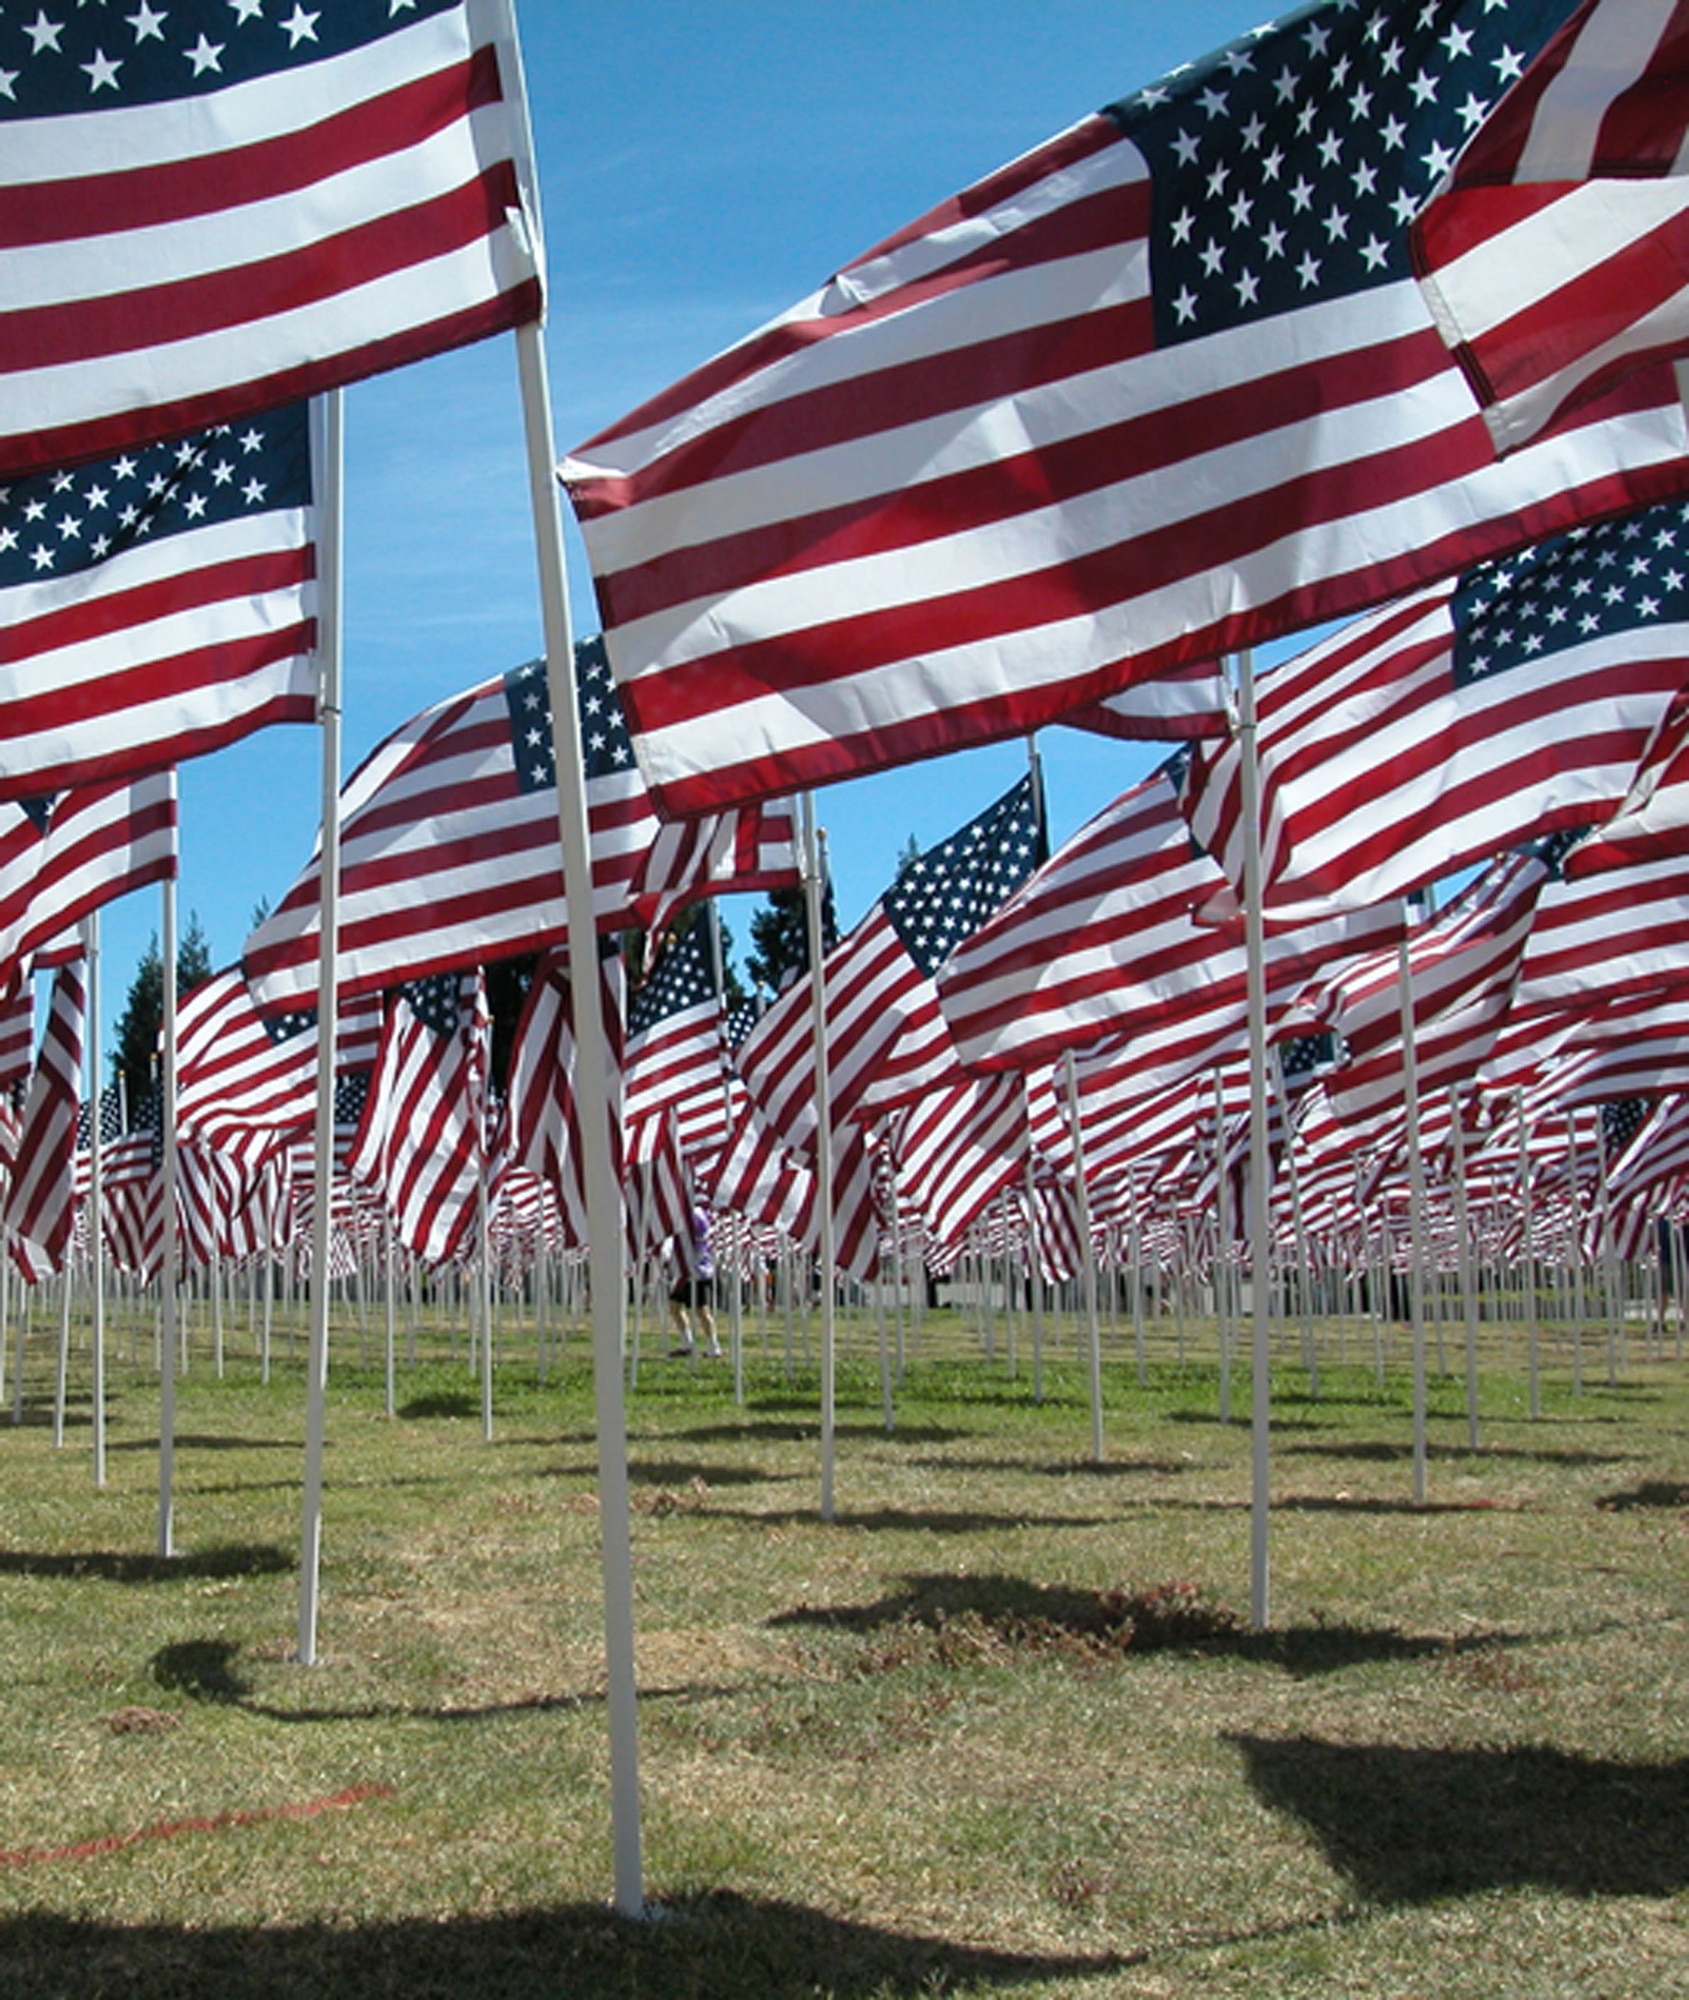 TRAVIS AIR FORCE BASE, Calif. -- Healing Field Memorial made up of 3,031 American Flags, one for each victim lost on 9/11. (U.S. Air Force photo / Patricia Schwab-Holloway)